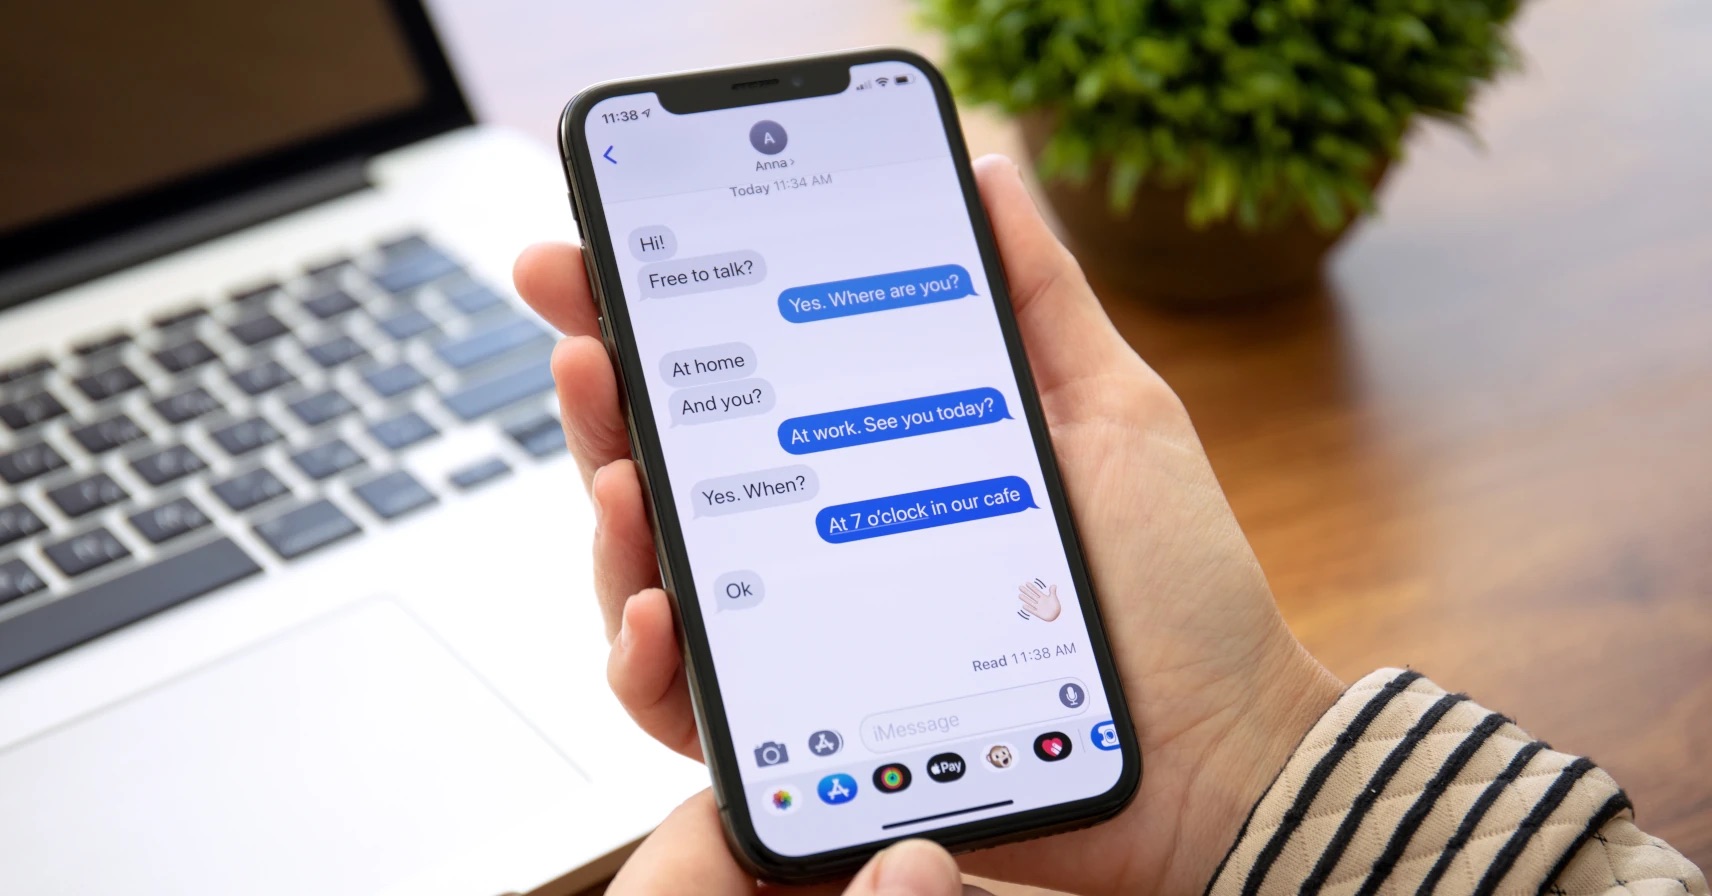 imessage-activation-enabling-imessage-on-iphone-12